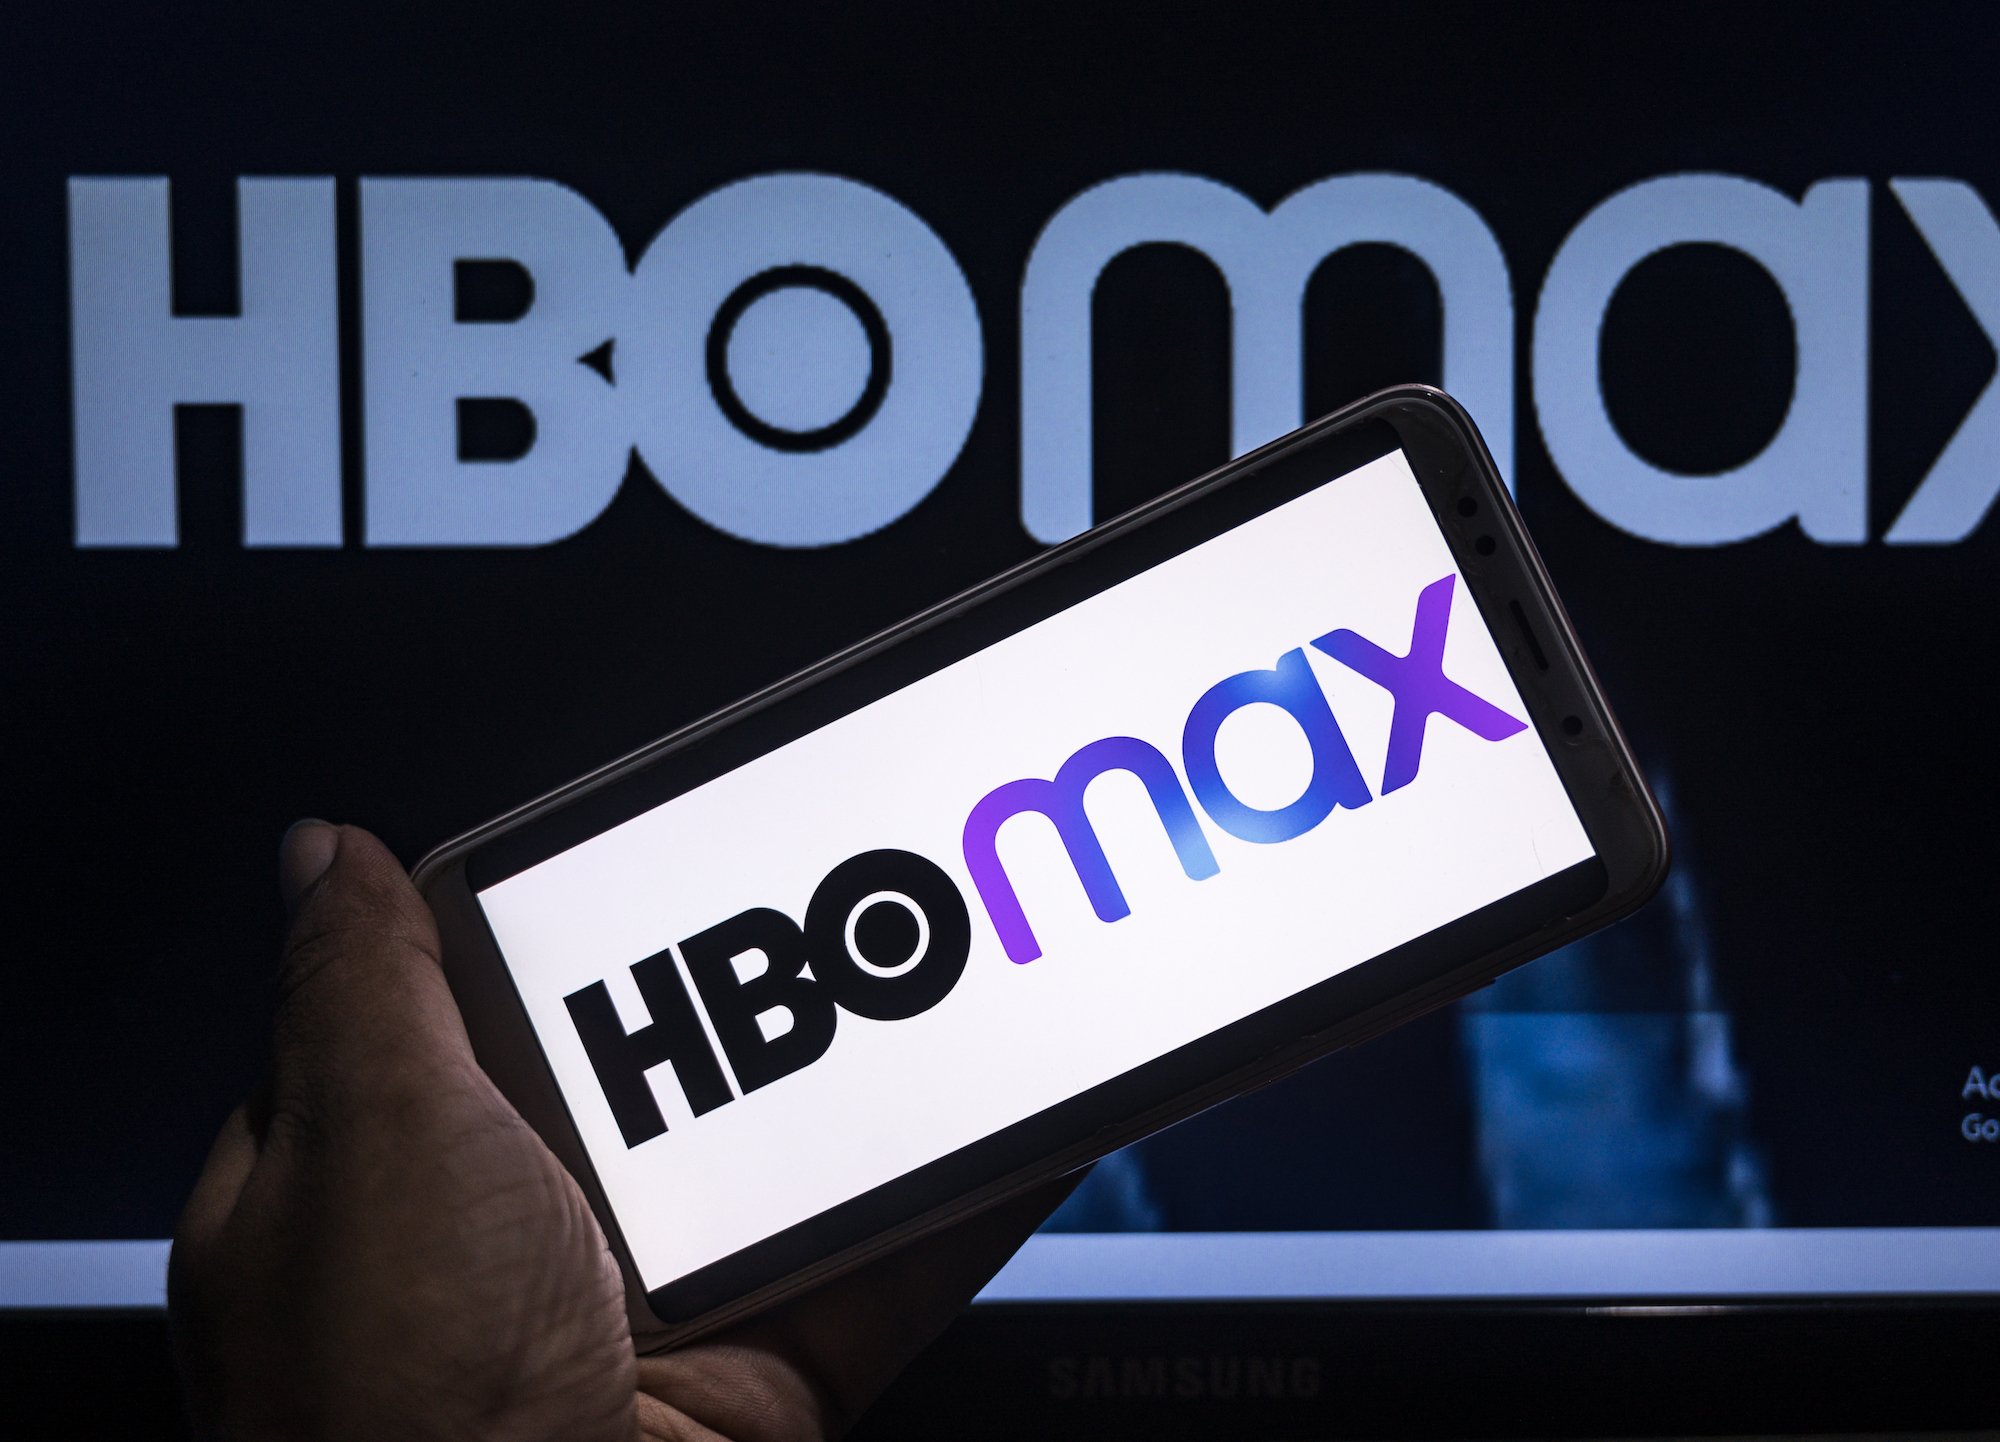 HBO Max logo on a phone screen